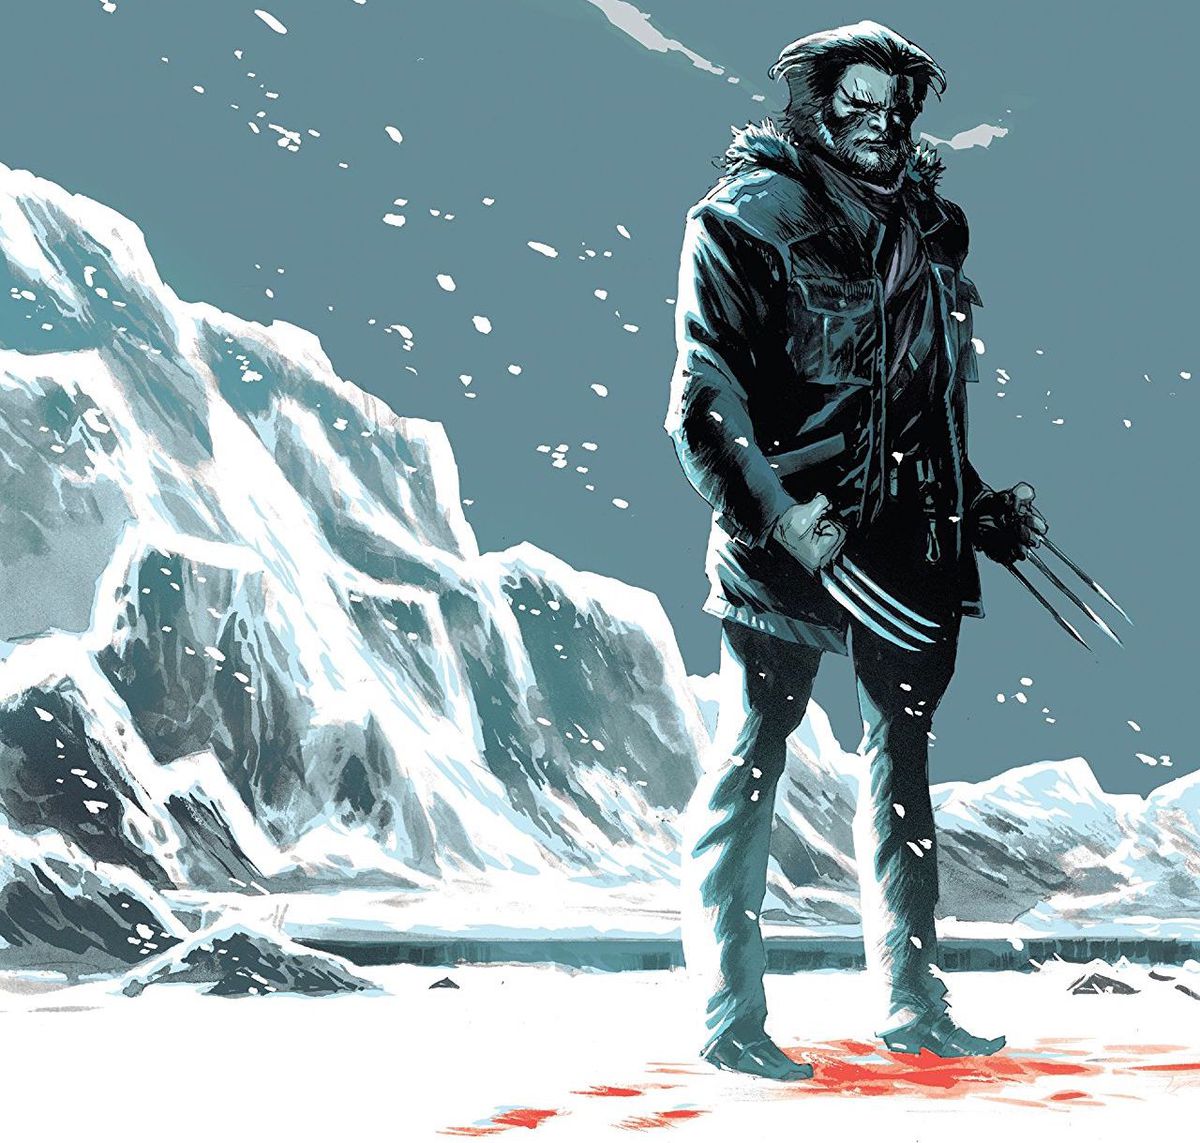 Wolverine pictured on the cover of Wolverine: The Long Night, claws out and standing on bloody snow.